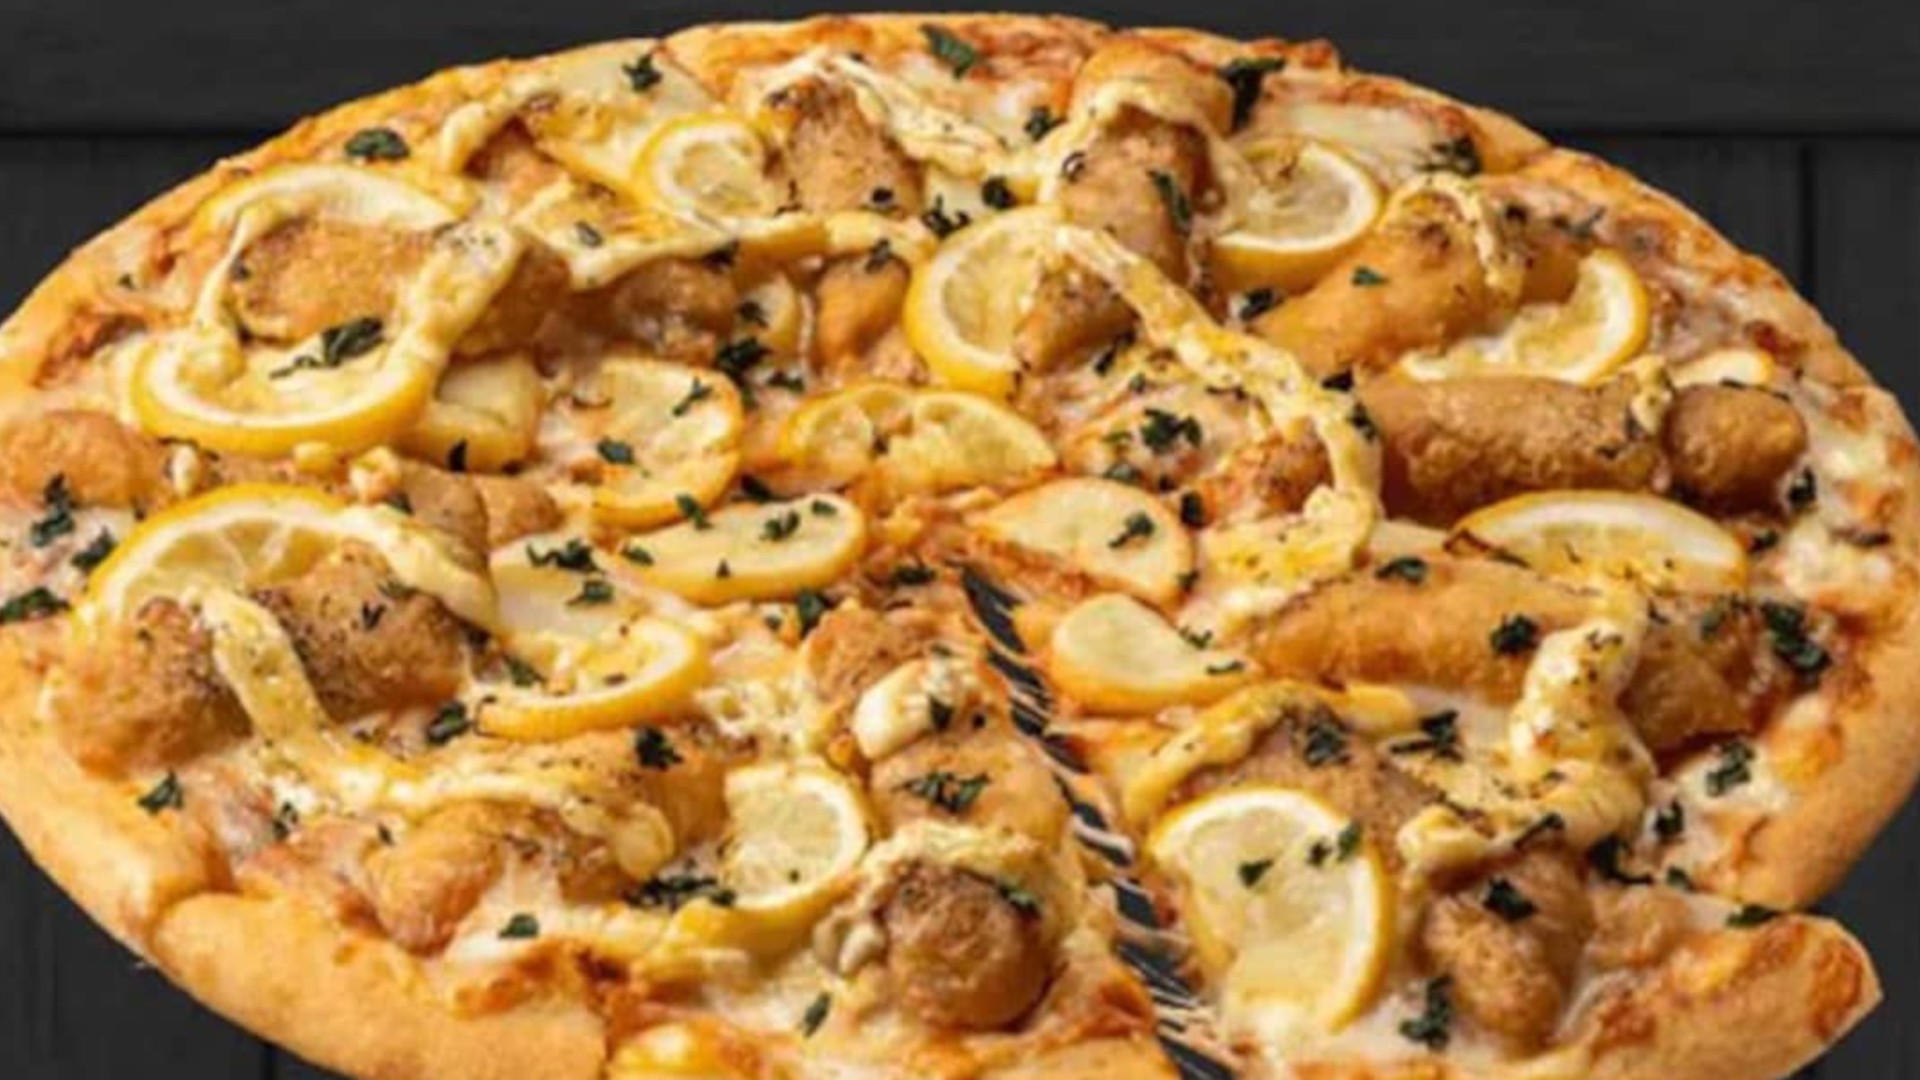 Domino’s New Fish & Chips Pizza Is Leaving Foodies Puzzled; Would You Try It?